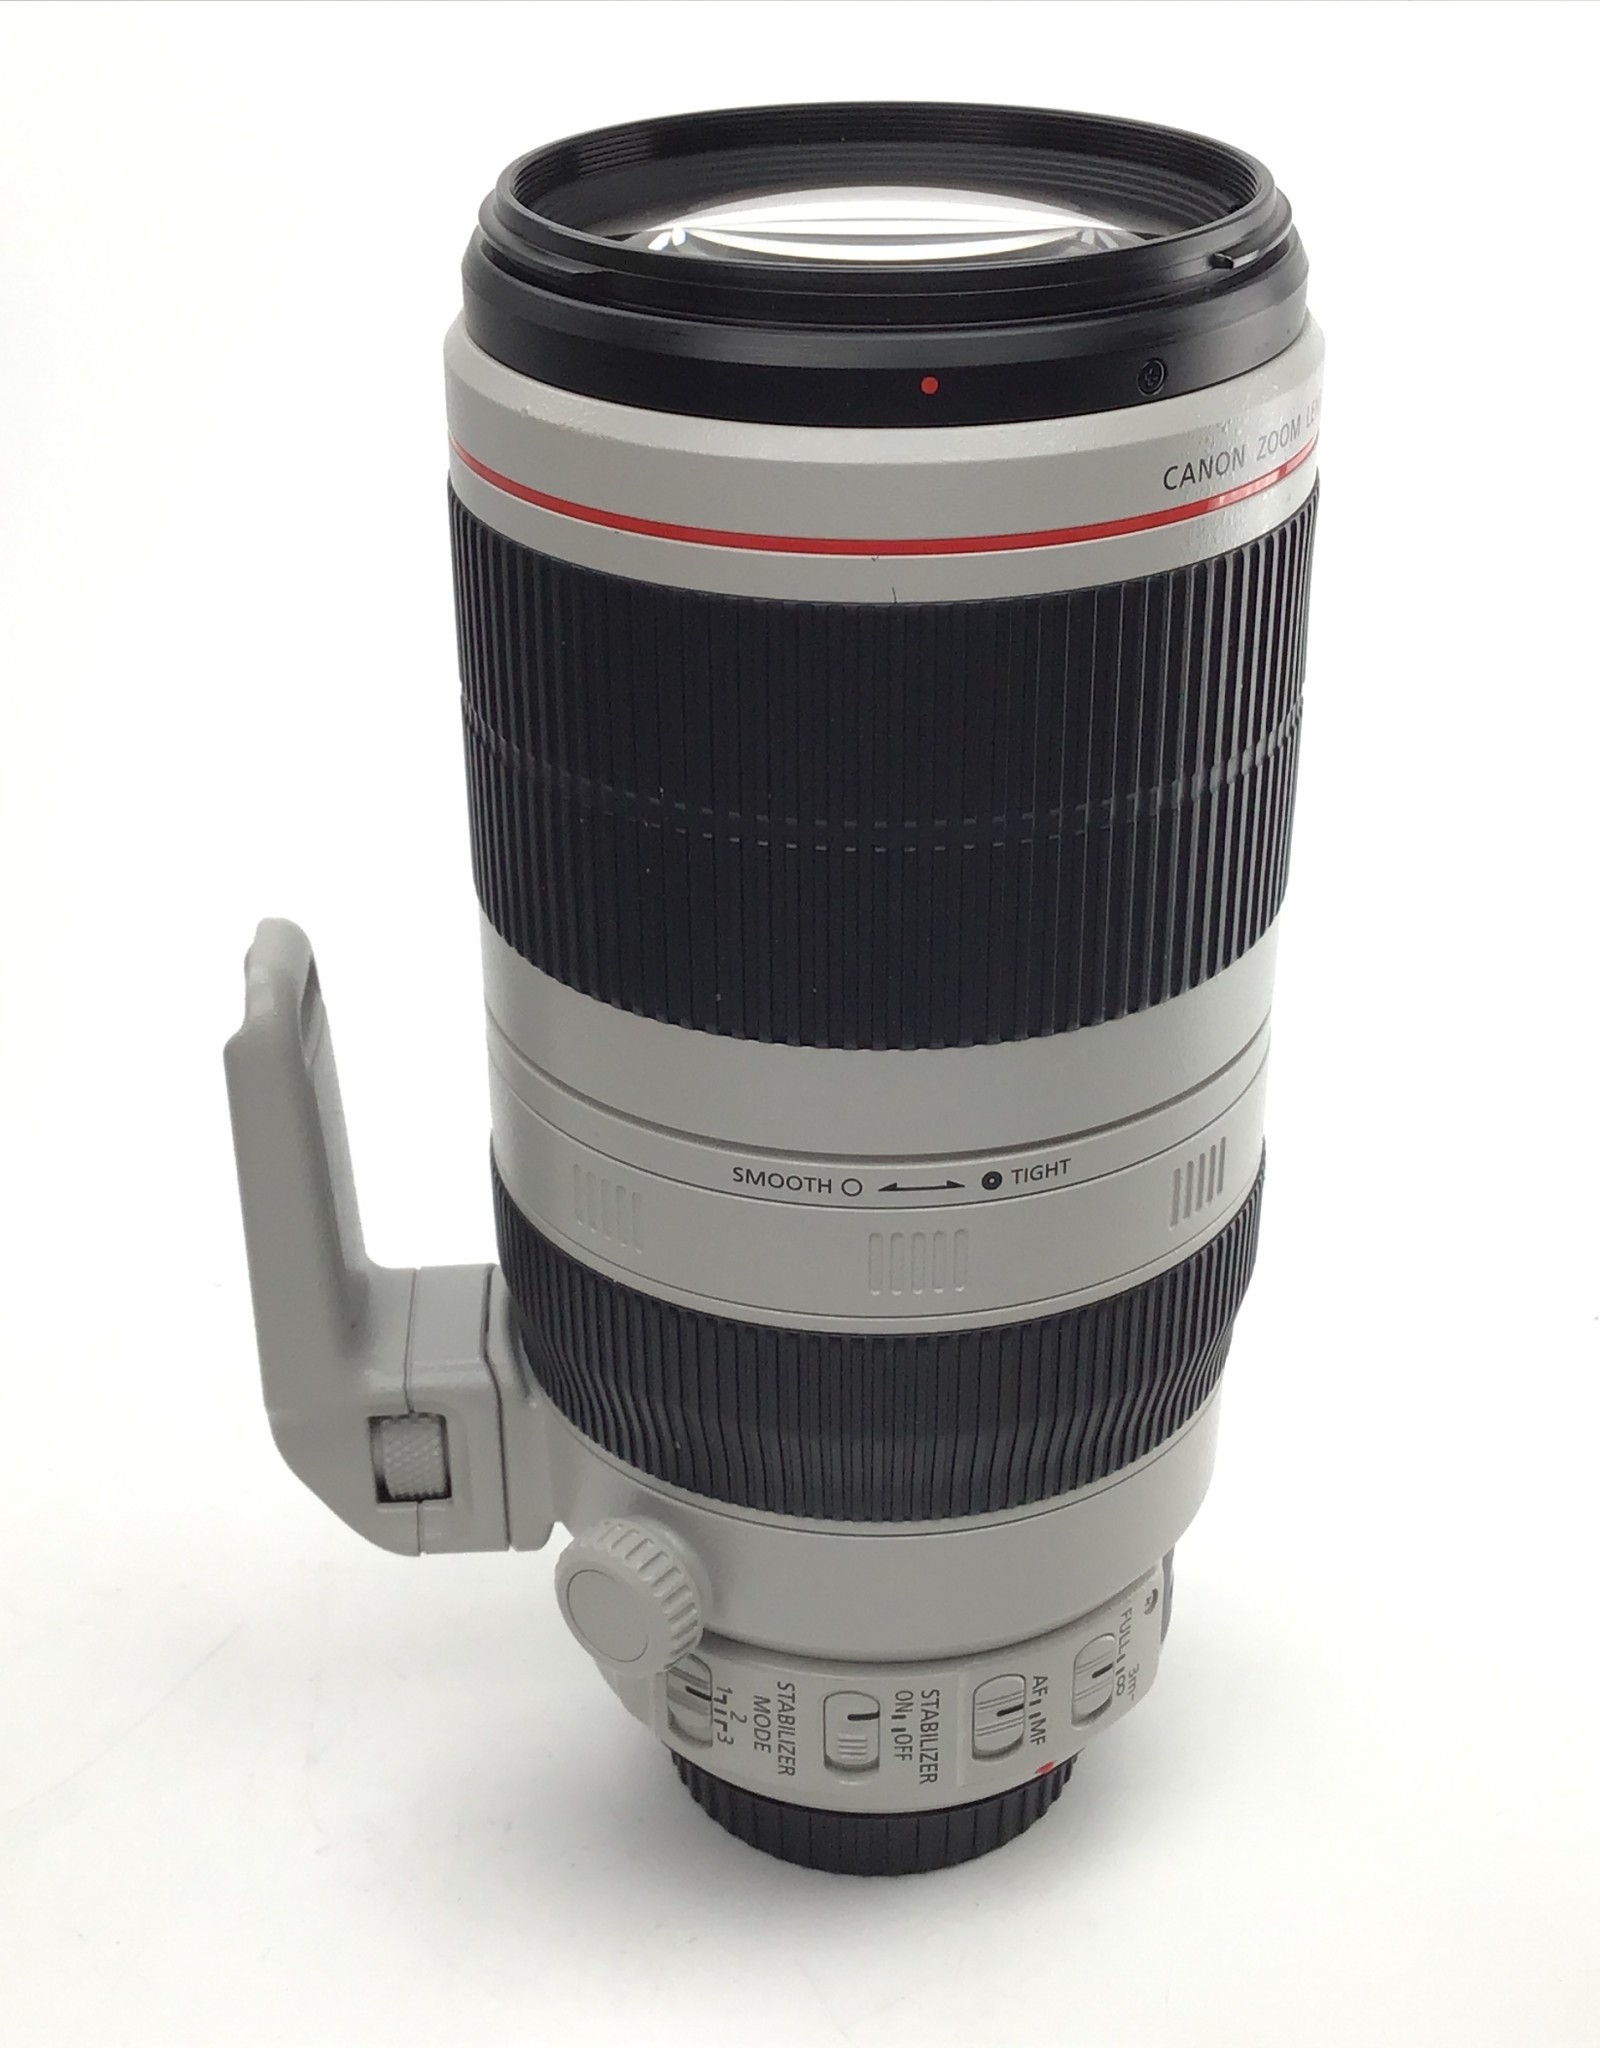 CANON Canon EF 100-400mm f4.5-5.6 L IS II Lens in Box Used EX